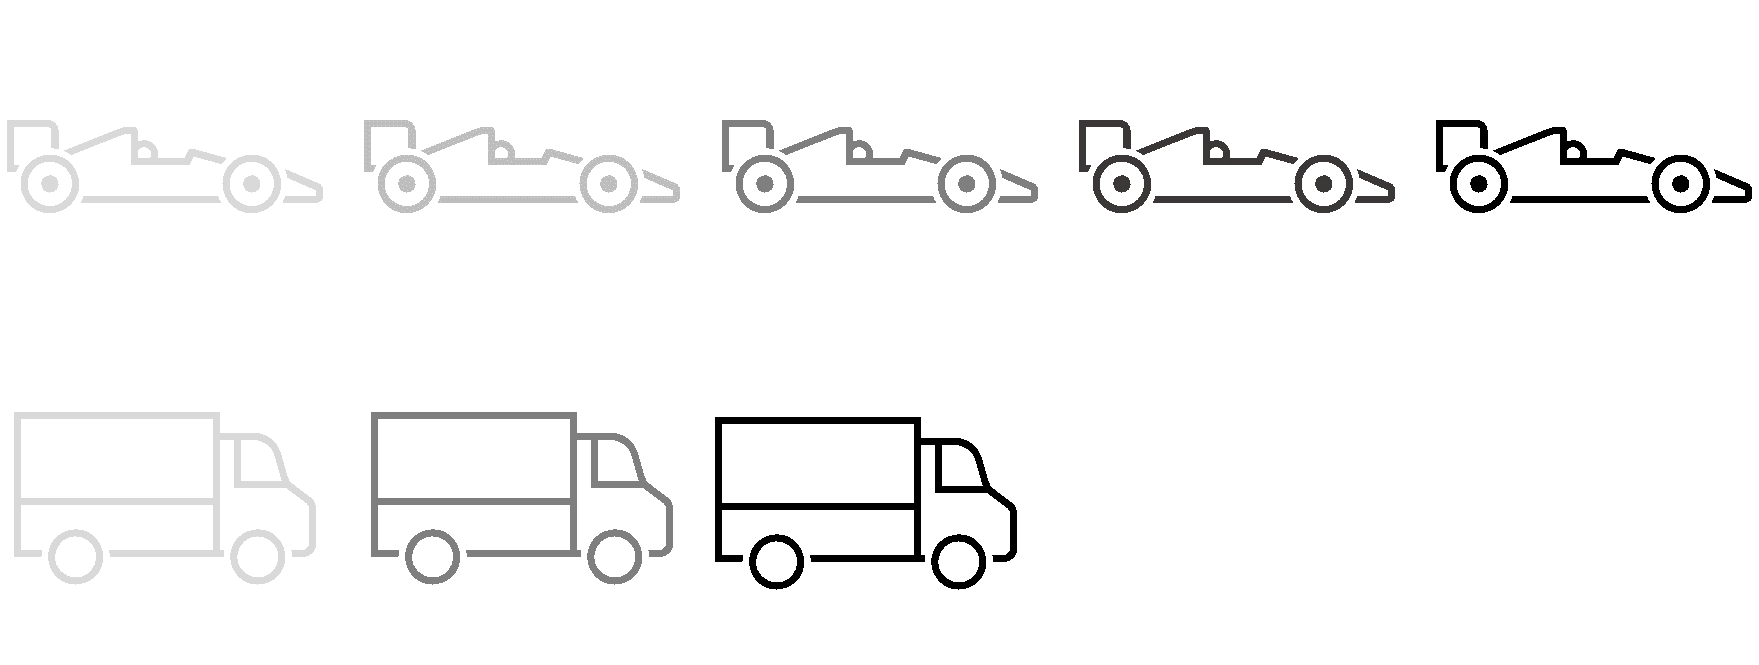 Figure 1: Analogy of the truck and the Formula One.